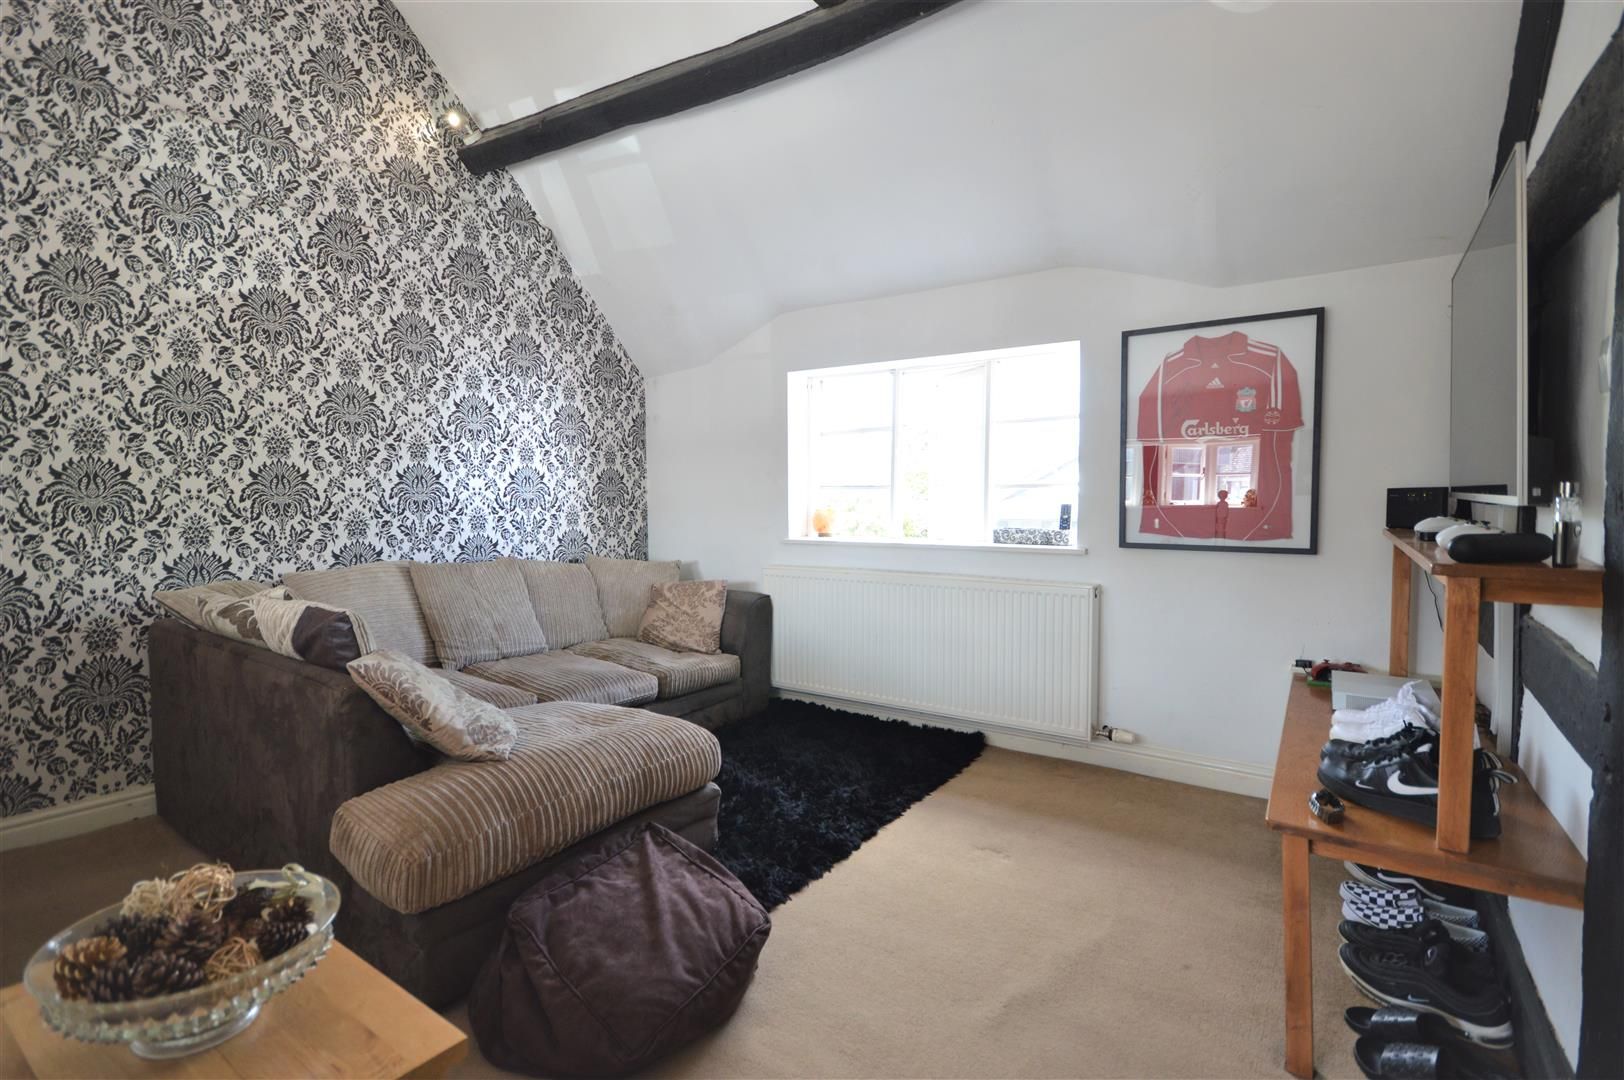 1 bed flat to rent in Kingsland - Property Image 1